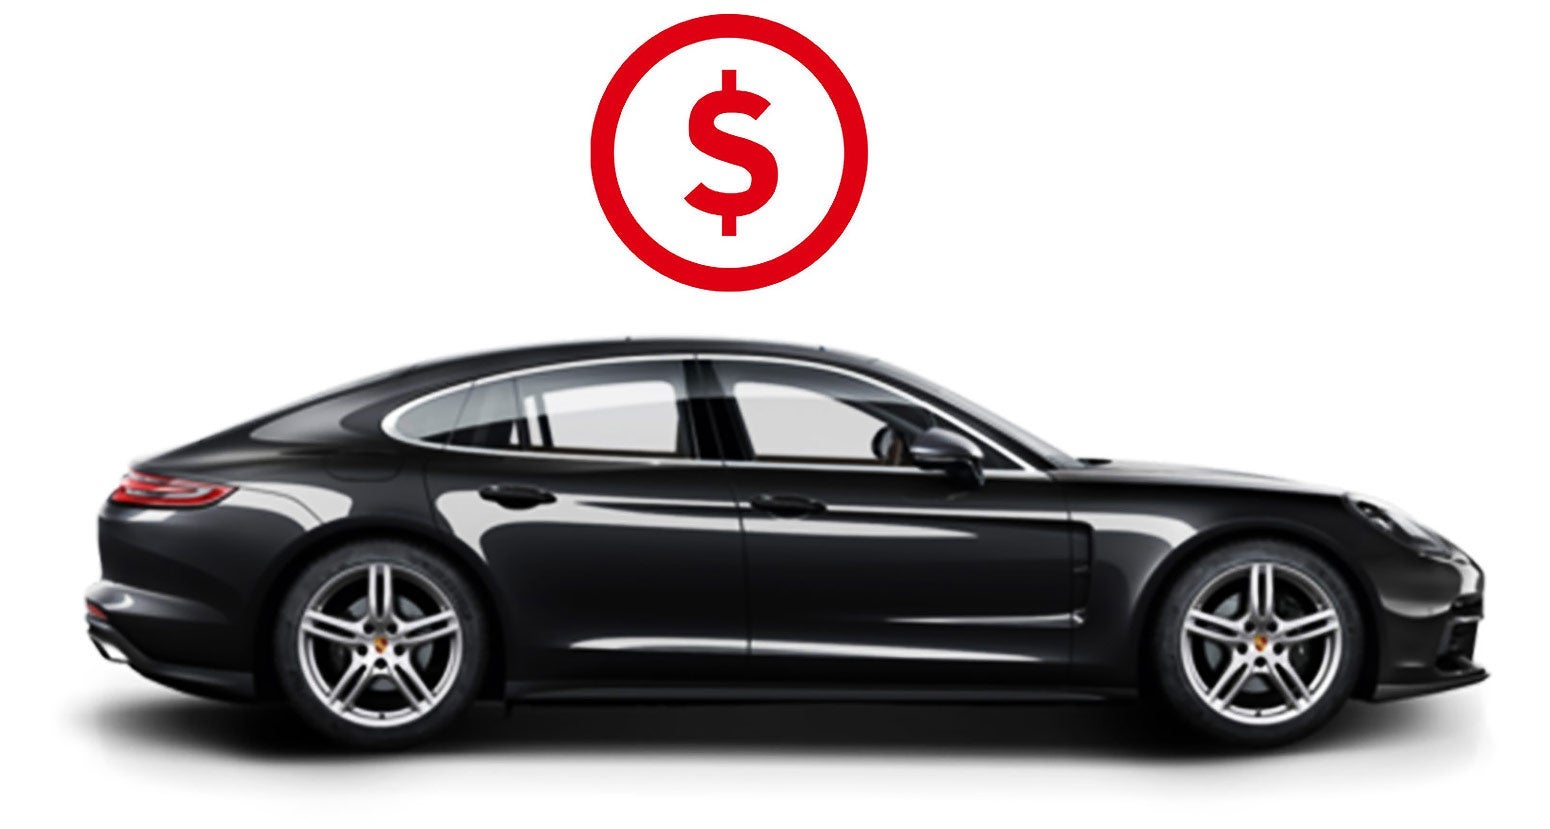 Value Your Trade-In | Porsche Tallahassee in Tallahassee FL